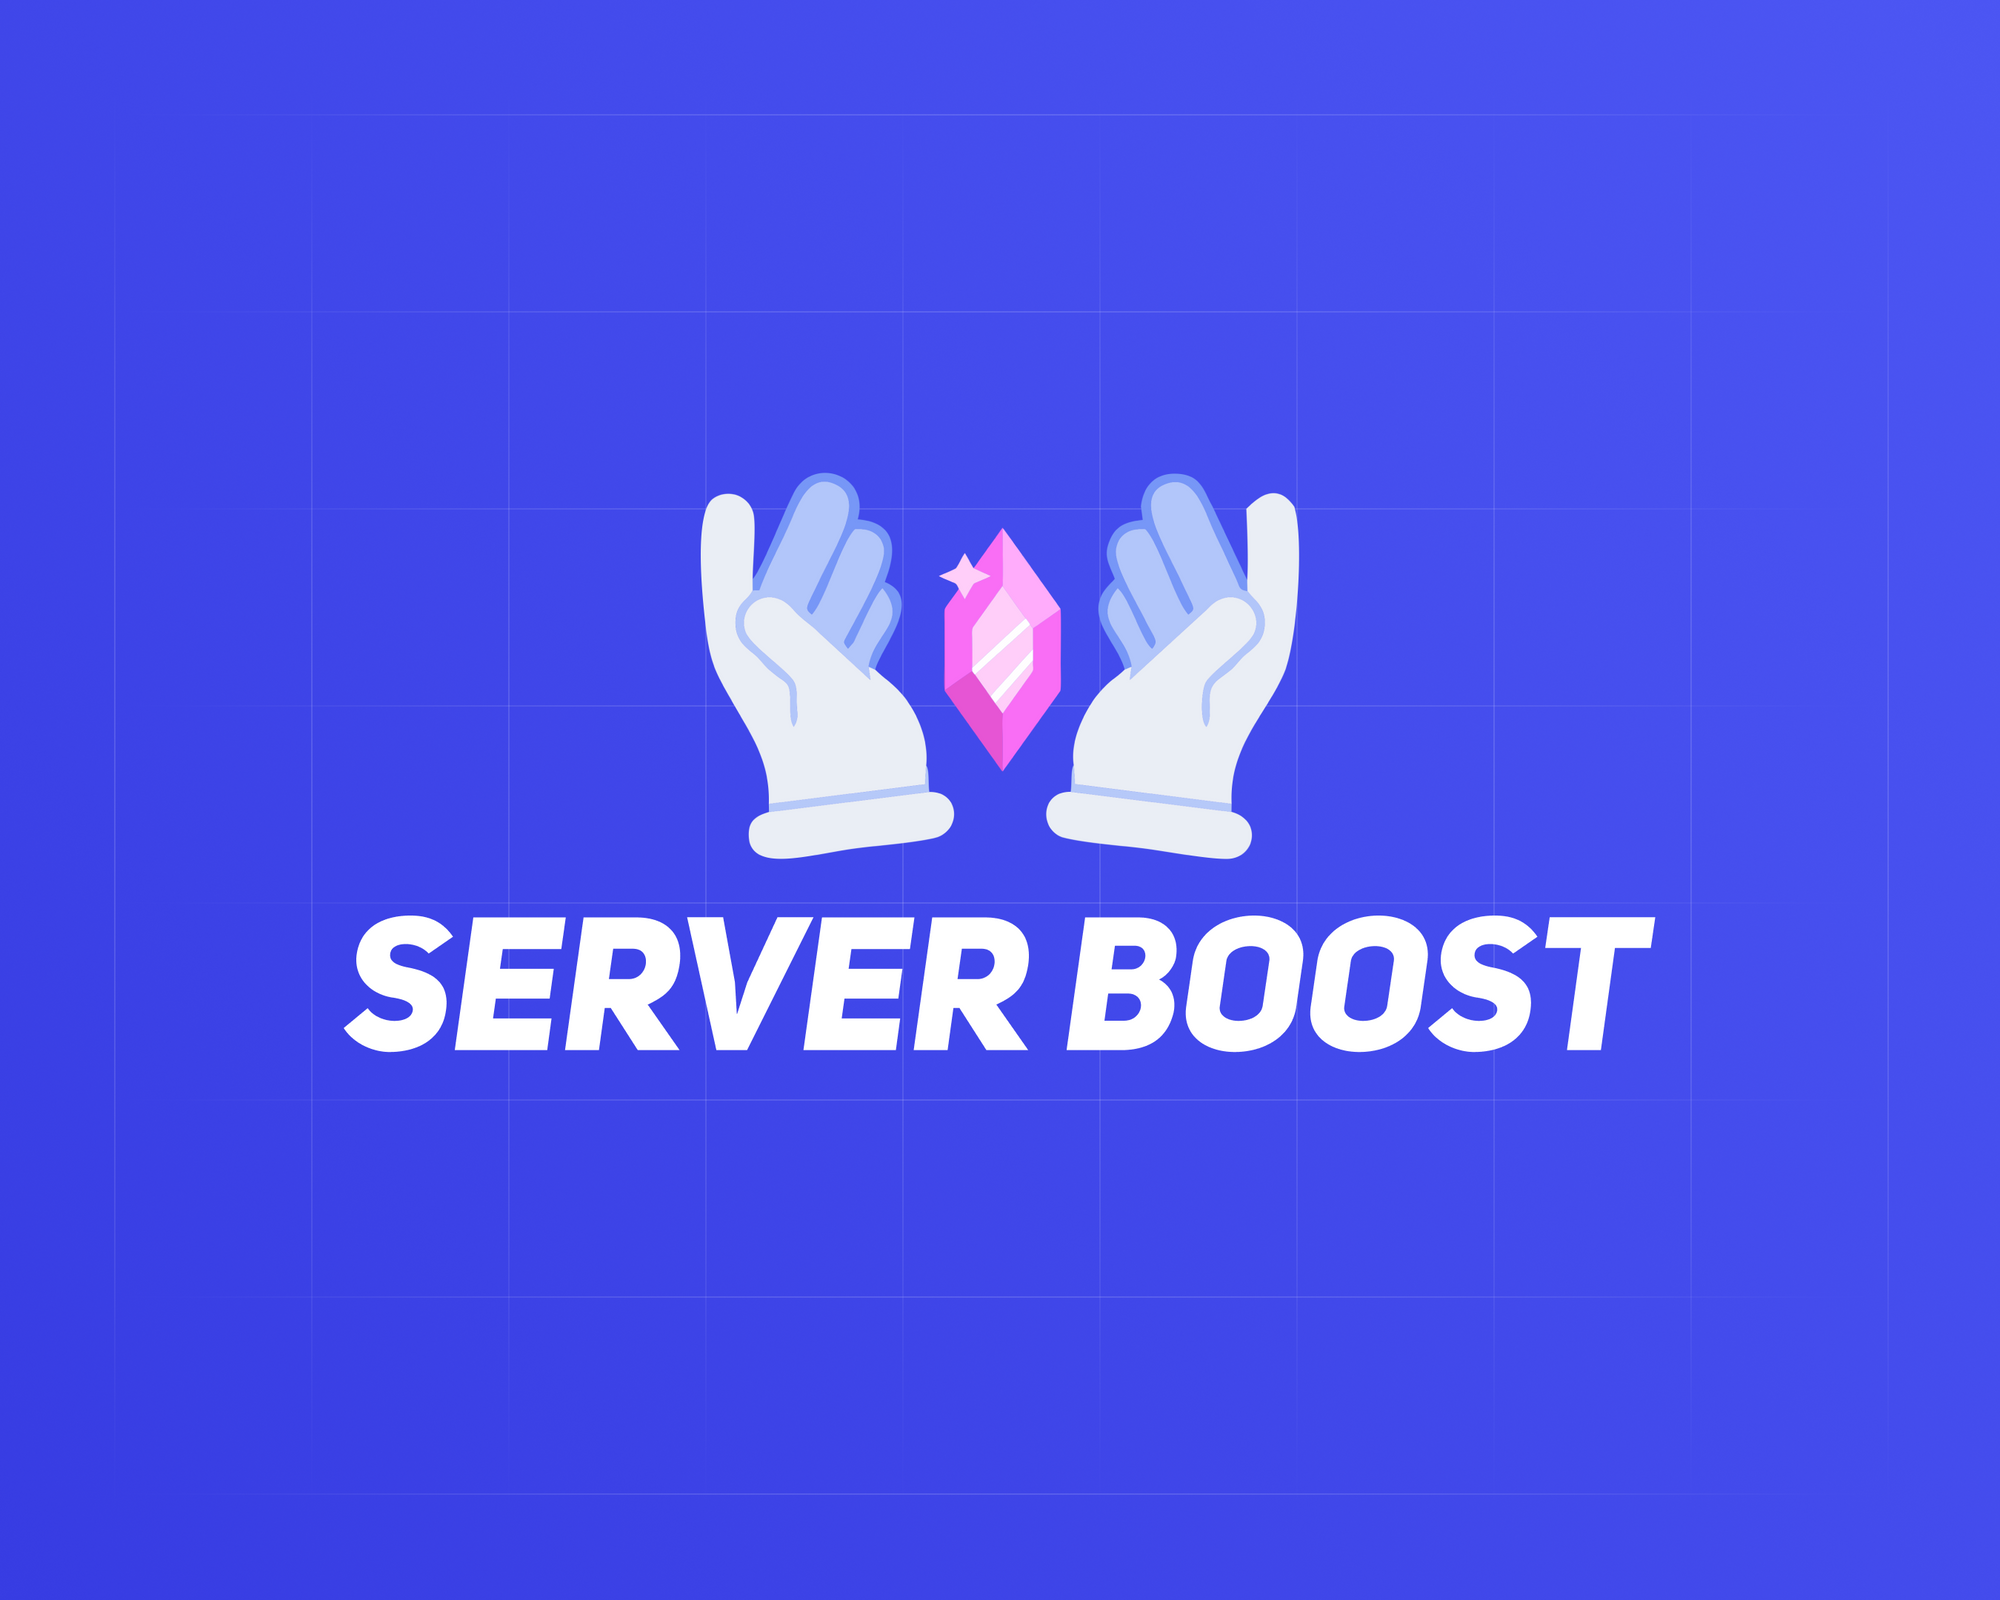 Hands lifting a nitro gem icon on a blue background, depicting affordable 3-month Discord Server Boosts.